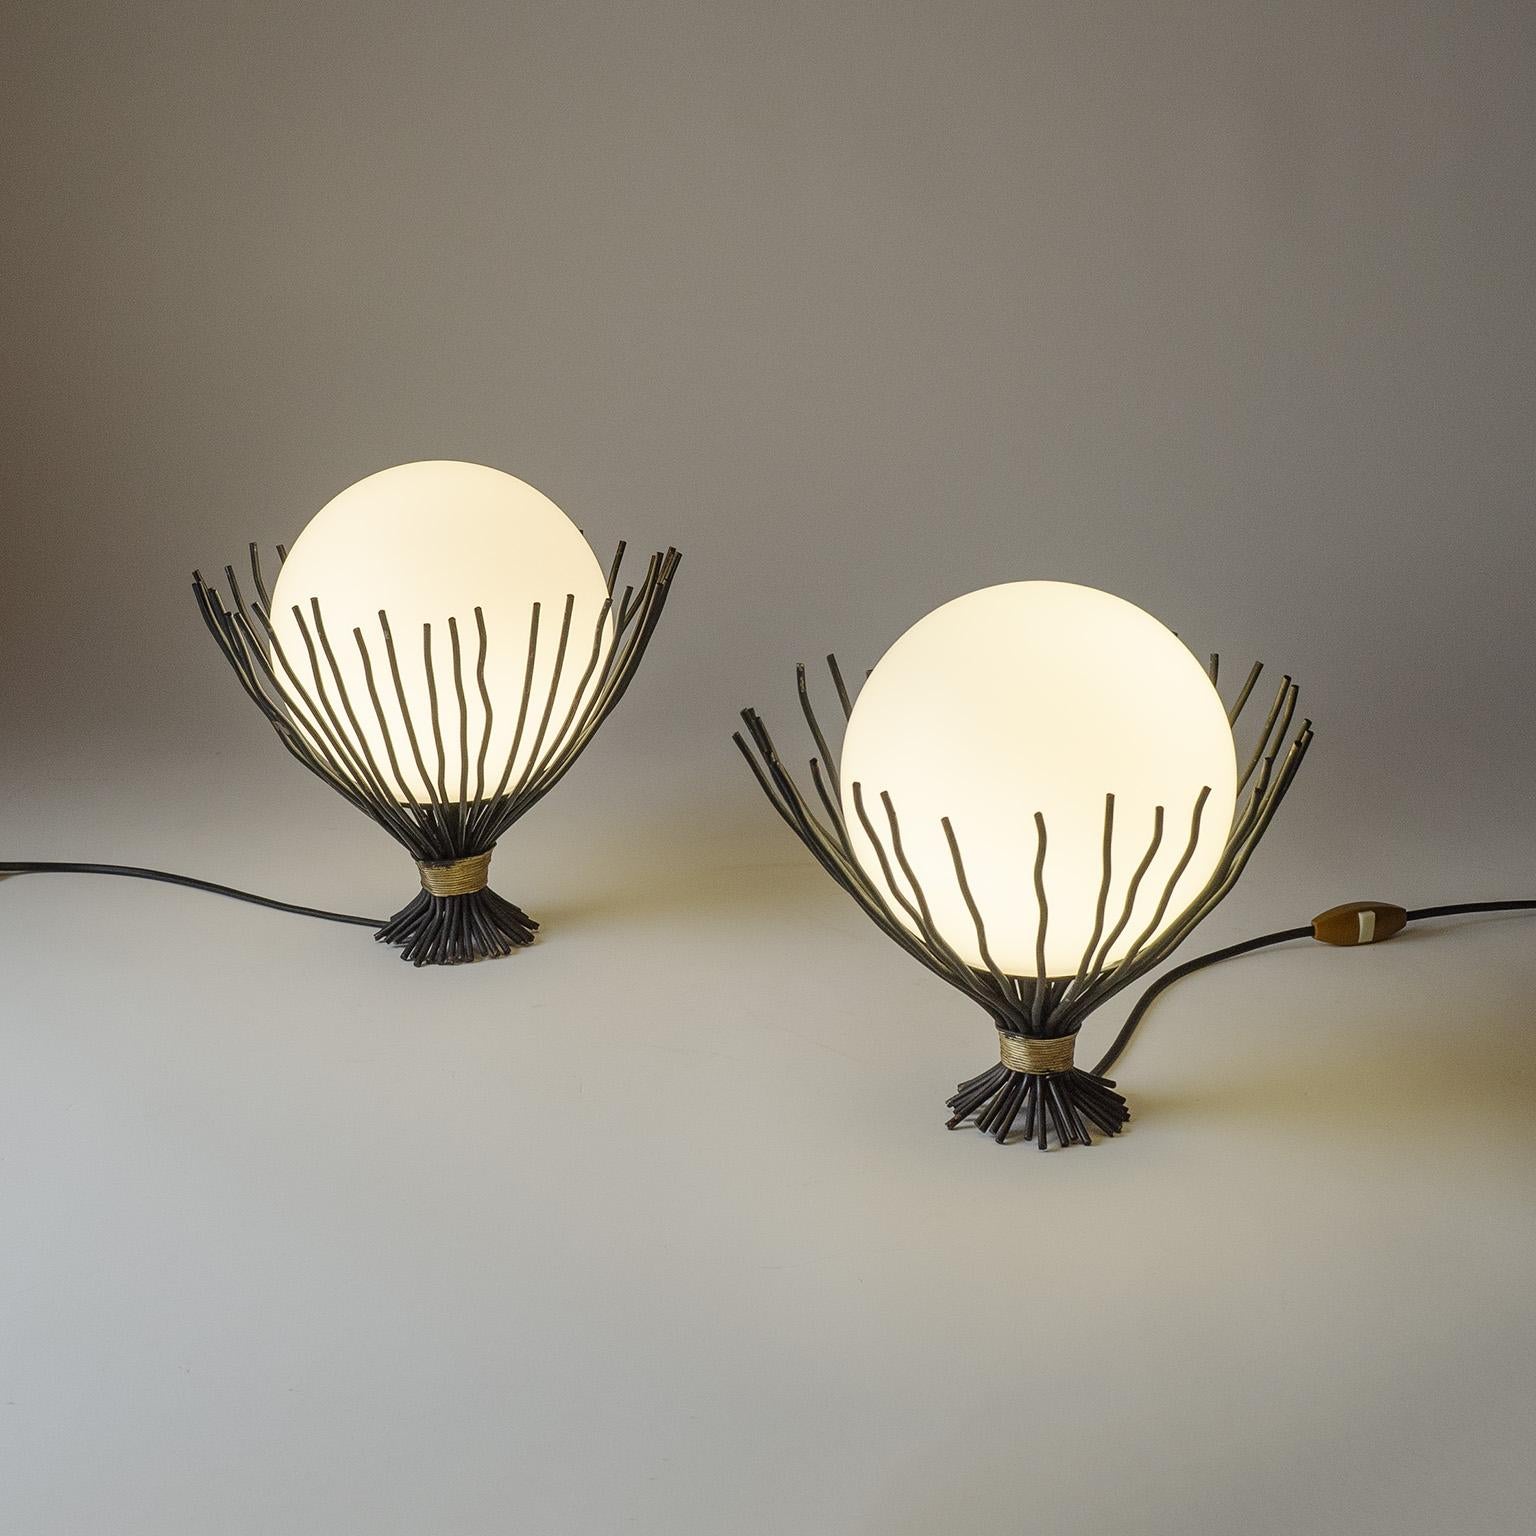 Mid-20th Century French Iron and Glass Table Lamps, 1960s For Sale